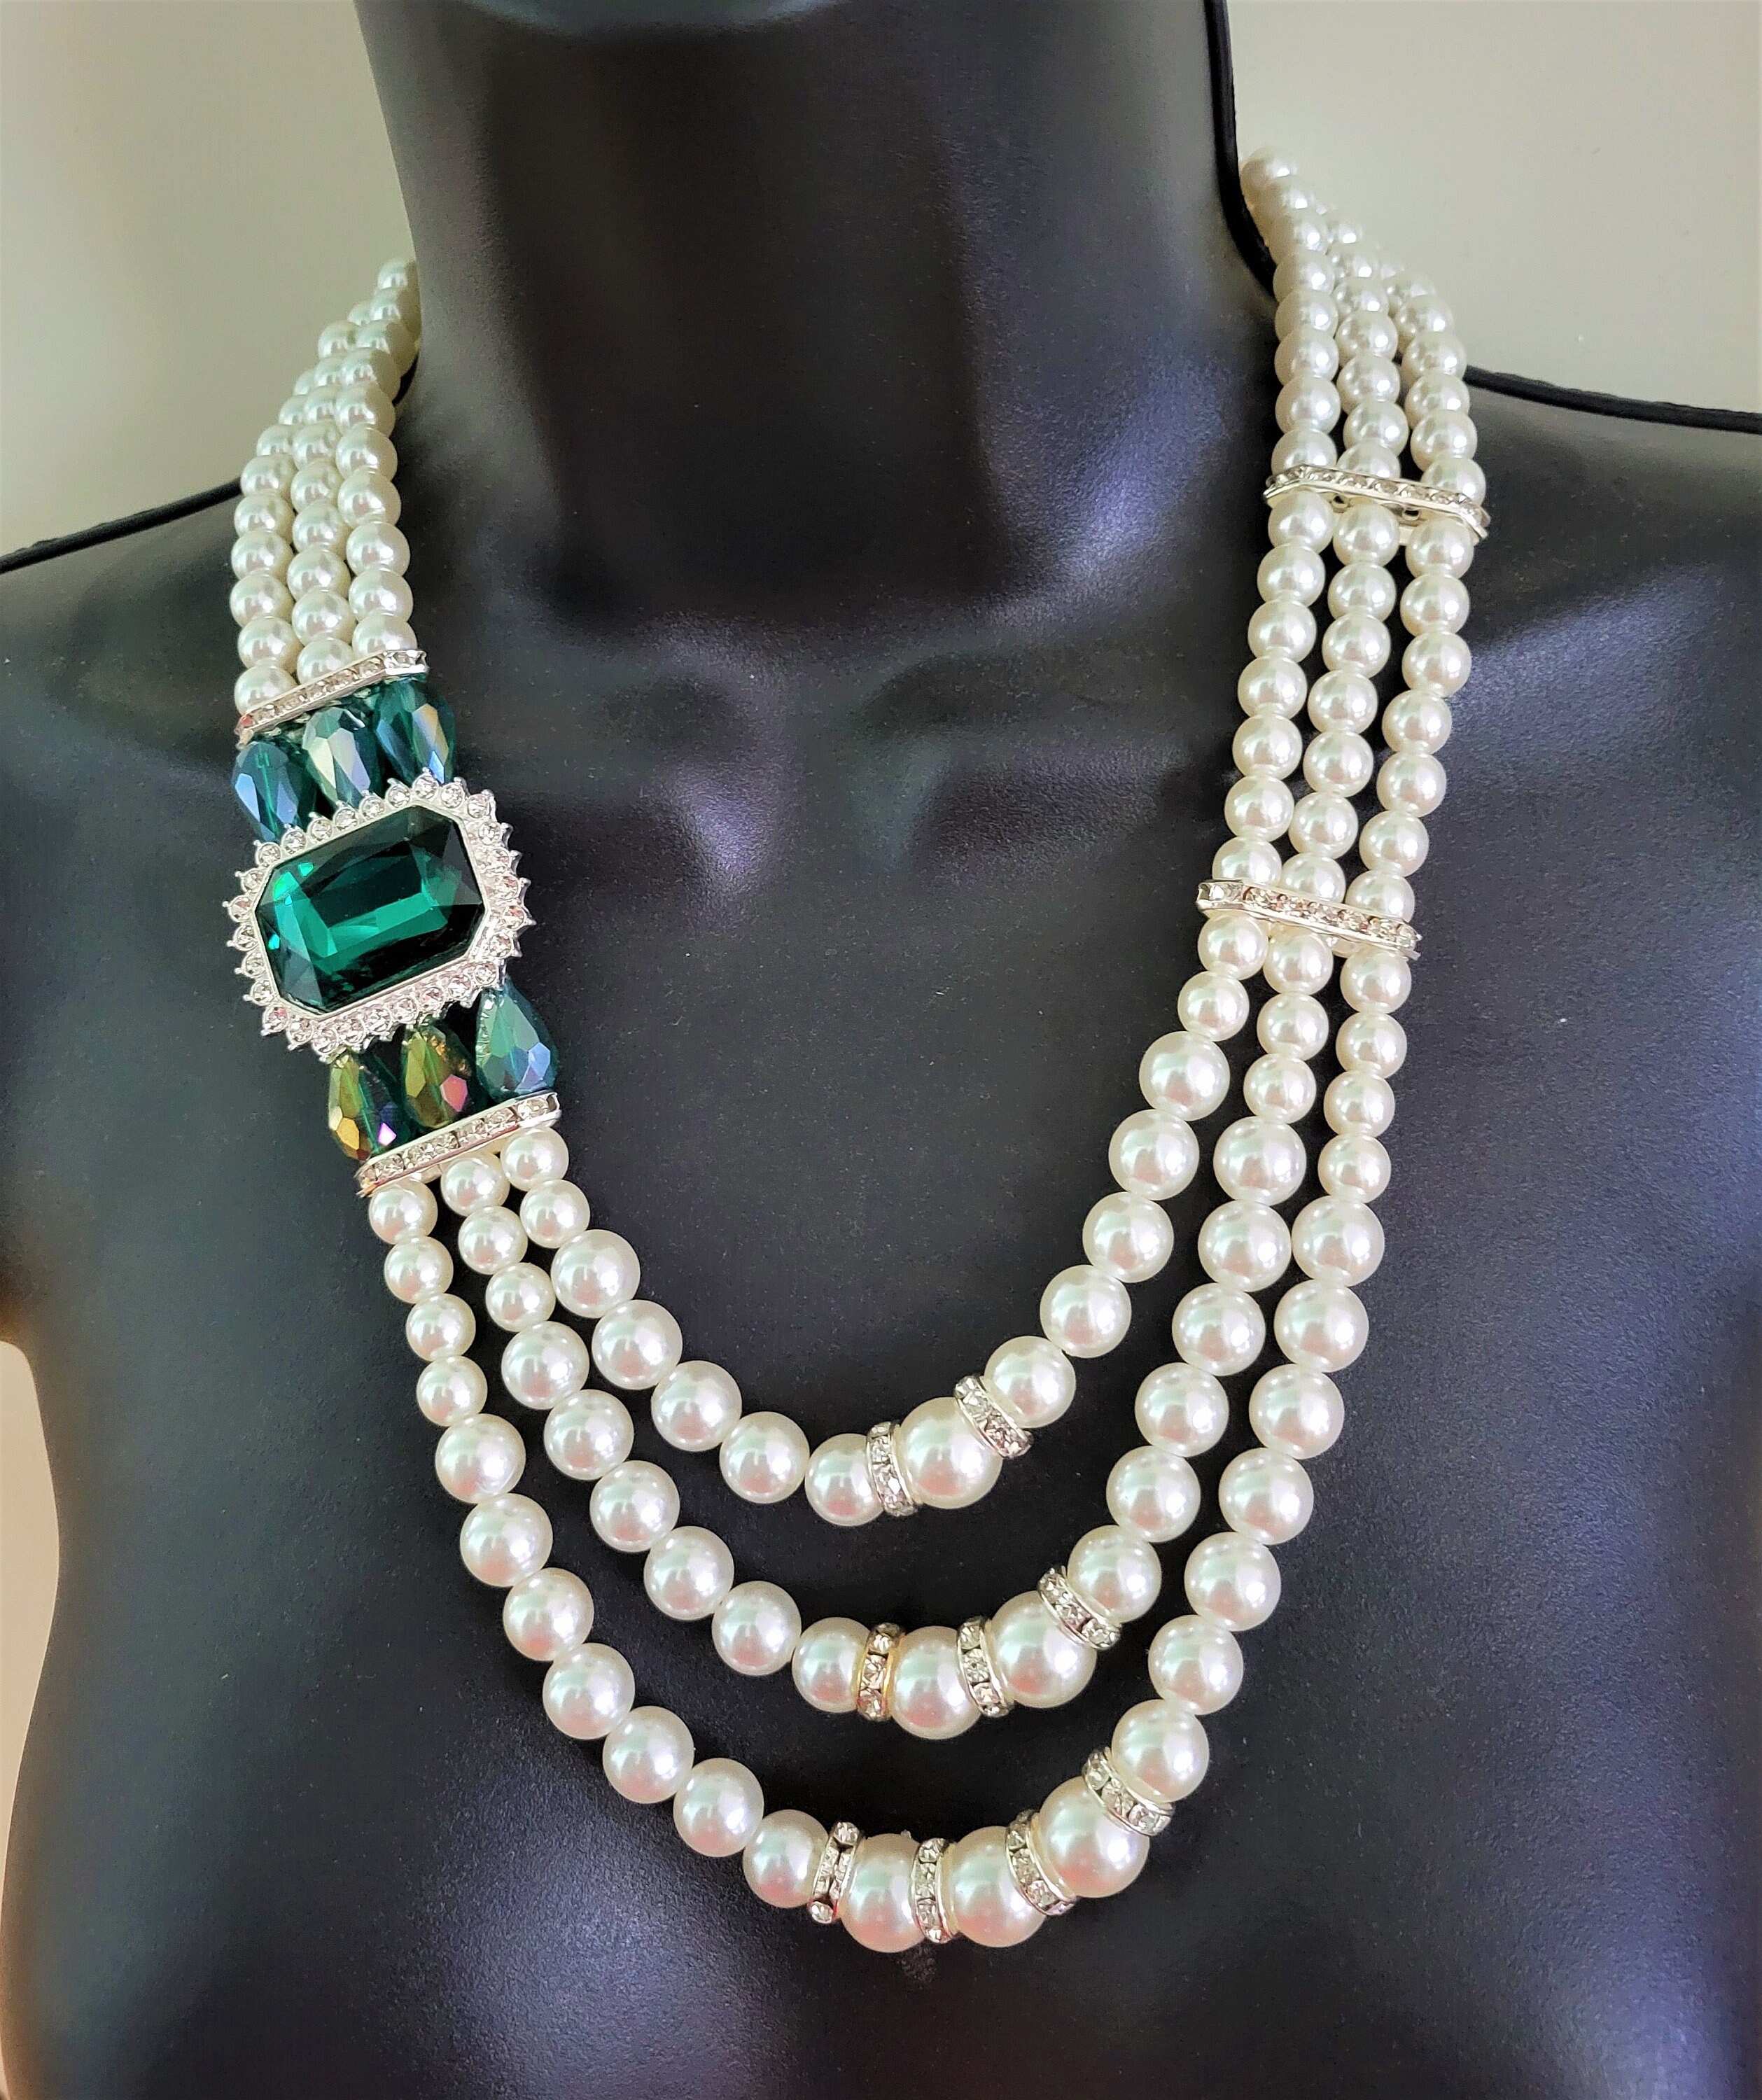 3 Strand Pearl and Emerald Green Diamond Crystal Side Necklace - Etsy